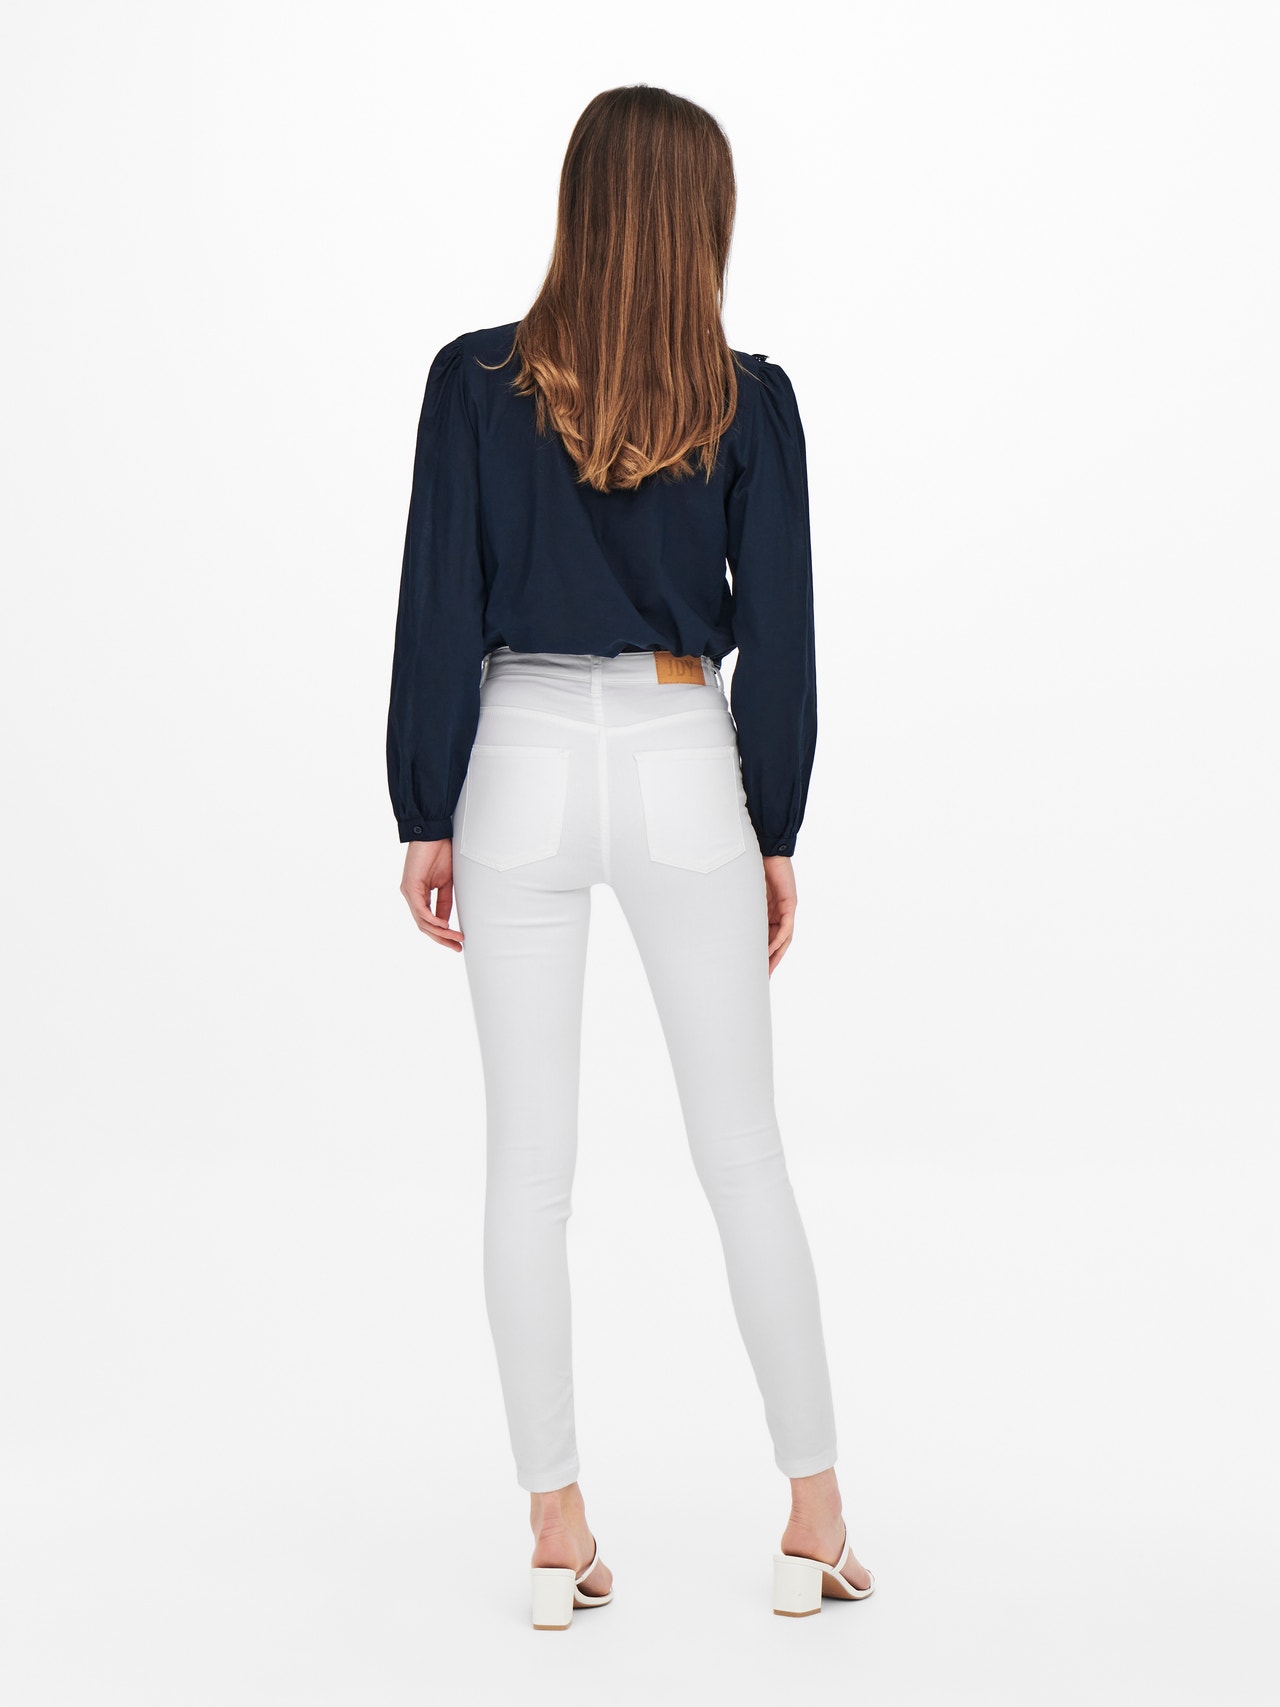 ONLY Skinny Fit Trousers -White - 15247662